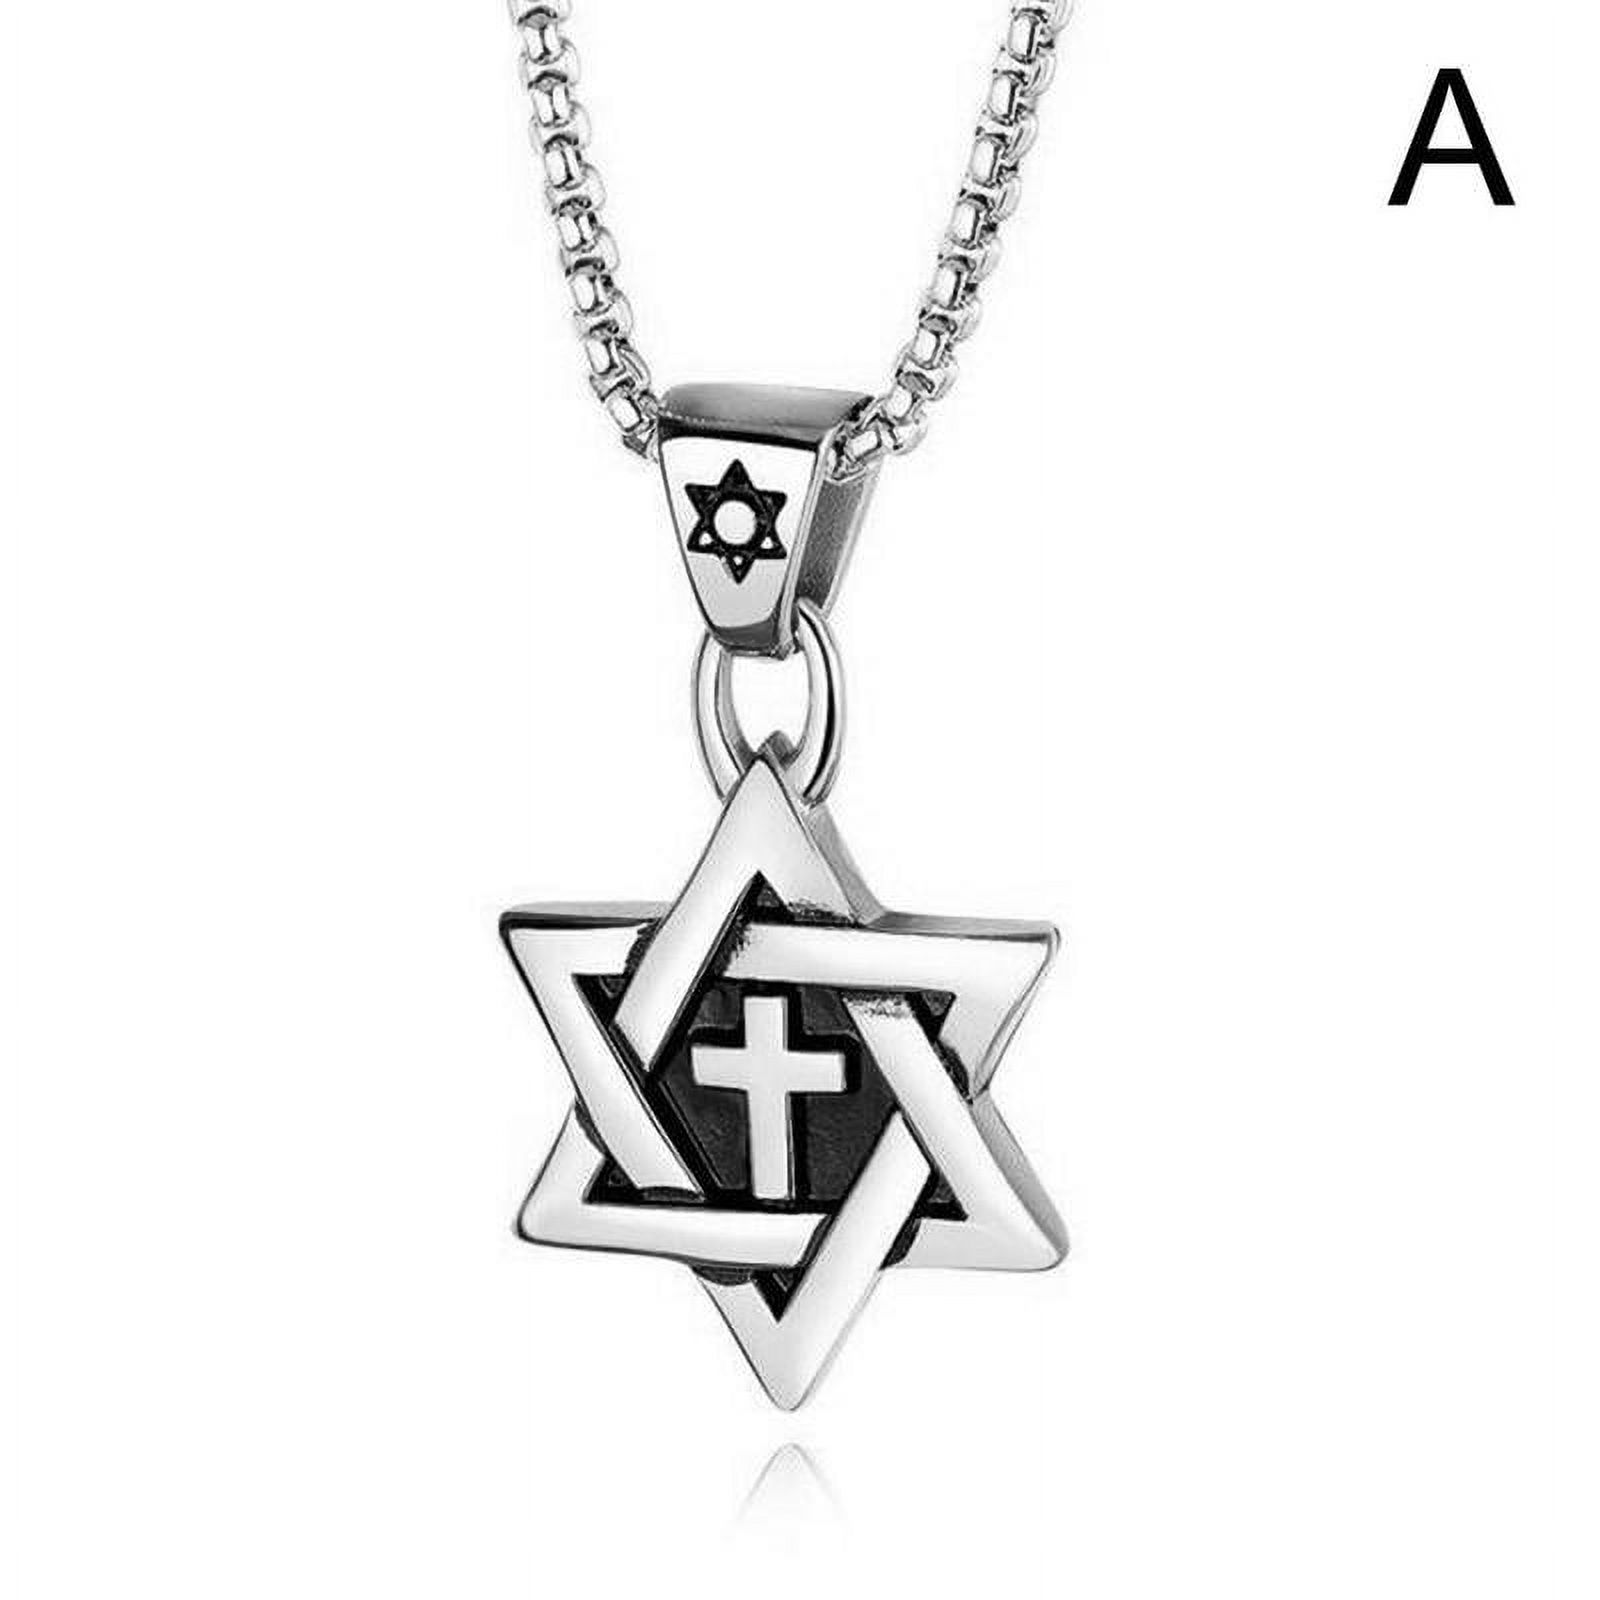 Stainless Steel Star Cross Pendant & Necklace Gold Color Women/Men Chain Israel Jewish Jewelry For Men - image 1 of 11